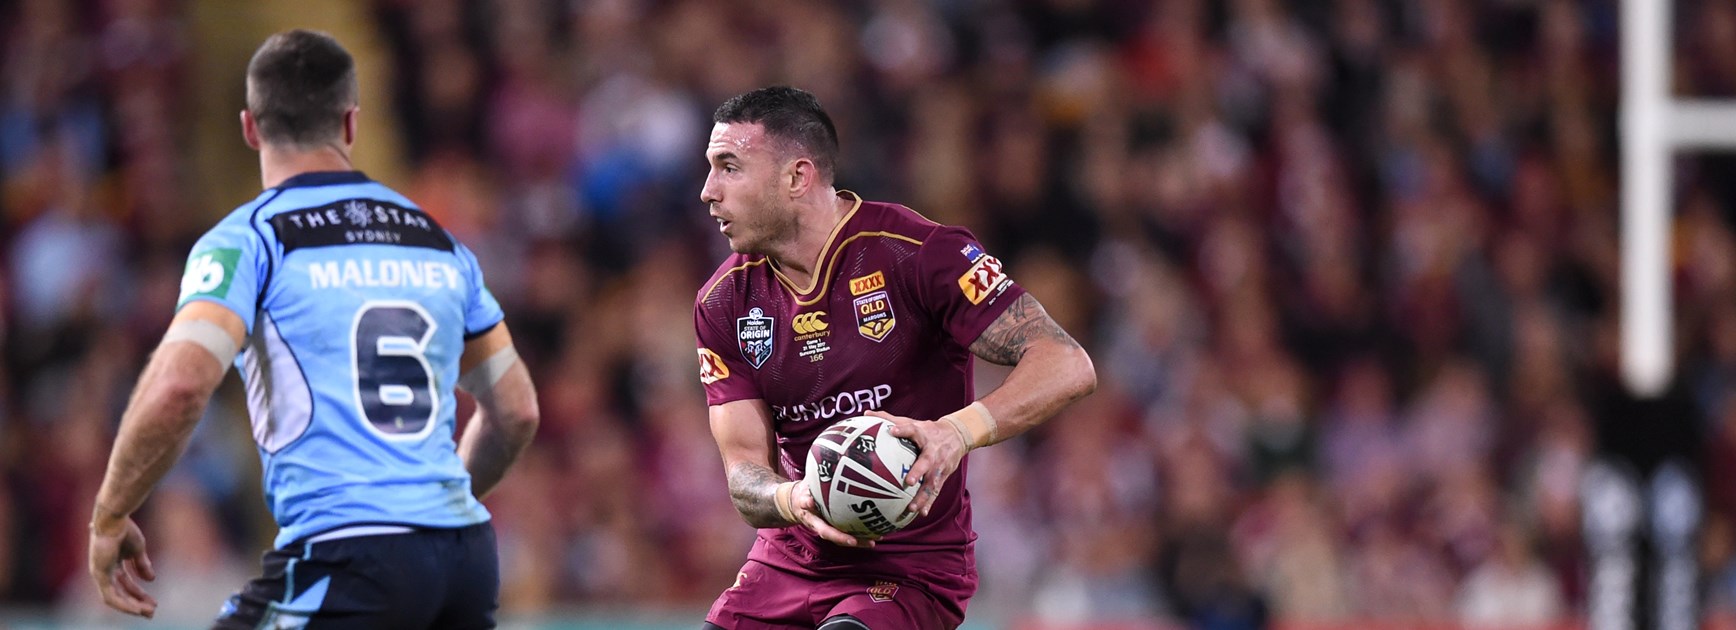 Darius Boyd in action for the Maroons in 2017.